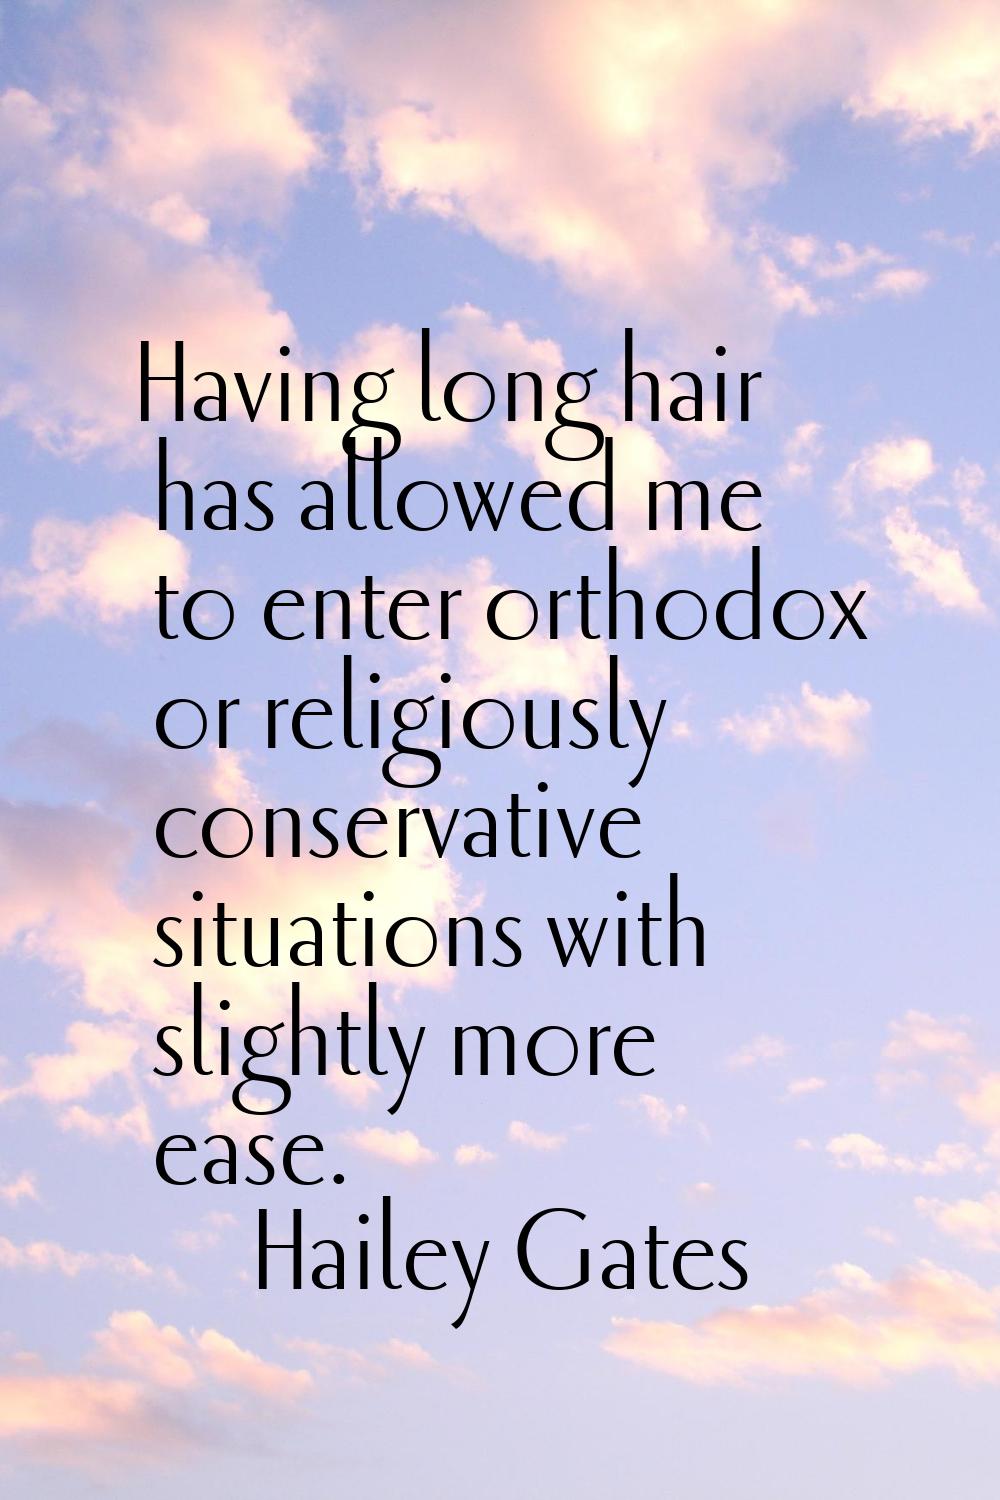 Having long hair has allowed me to enter orthodox or religiously conservative situations with sligh